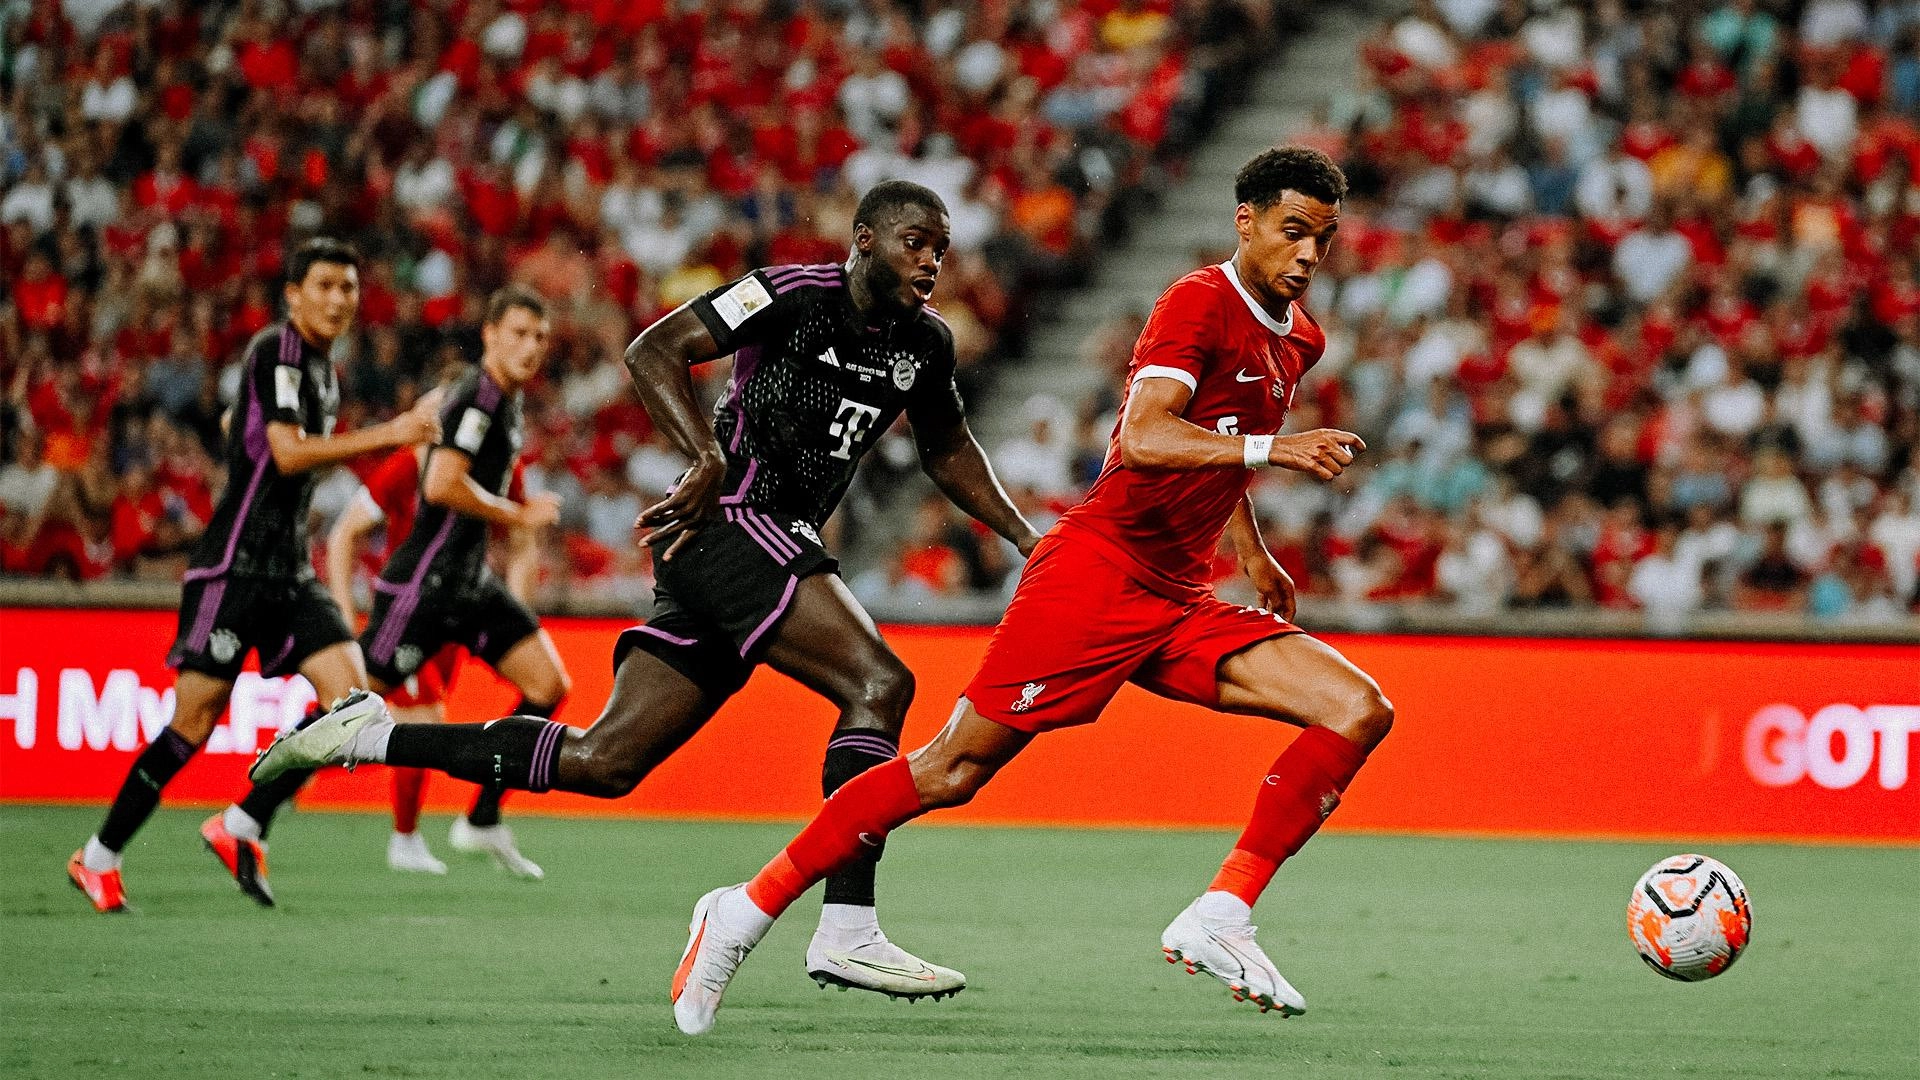 Liverpool 3-4 Bayern Munich Watch highlights and full 90 minutes